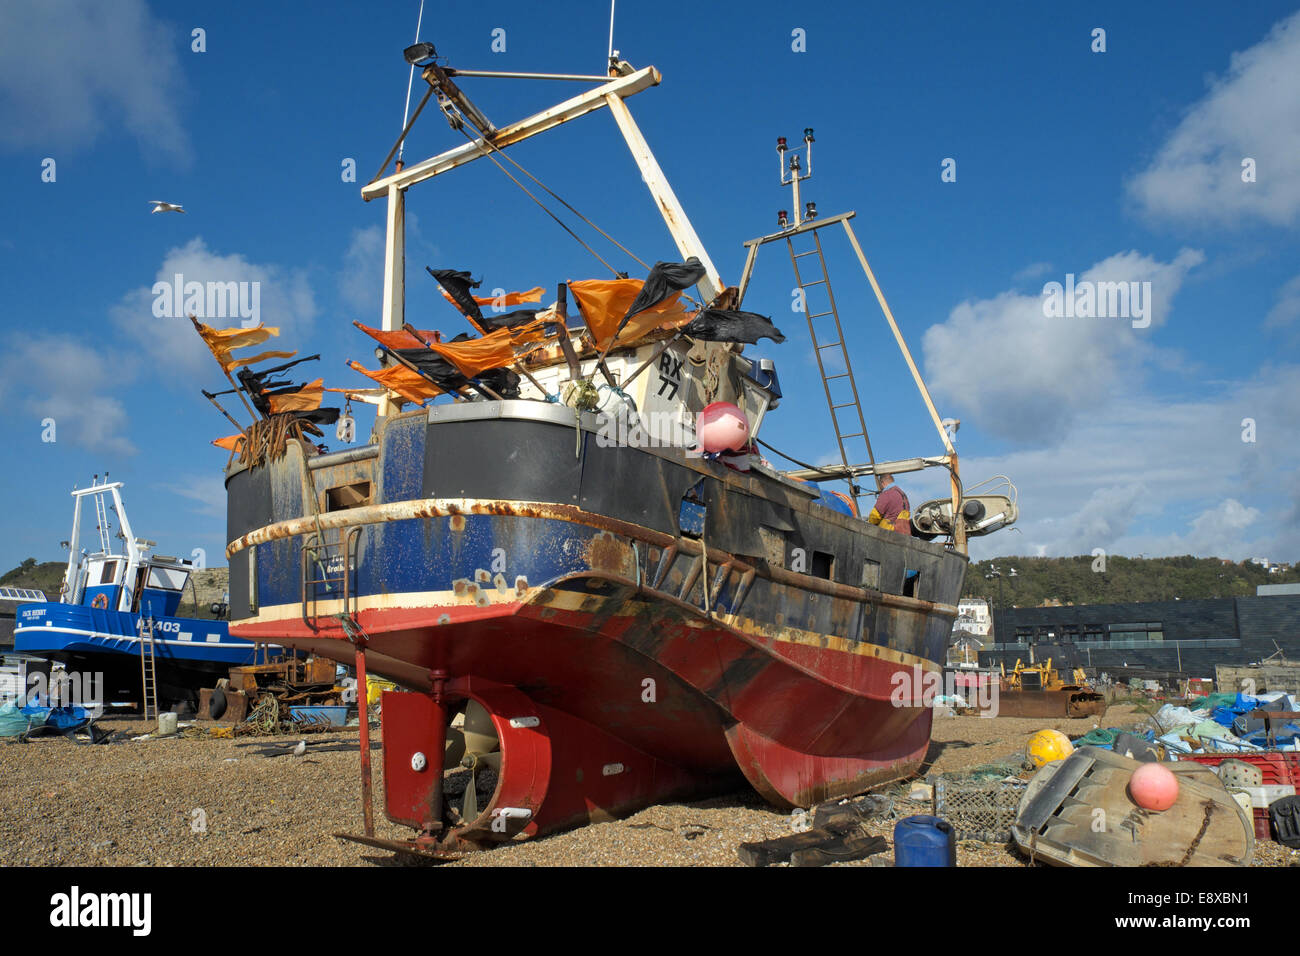 Trawlers on Hastings stade fishing boat beach East Sussex England GB UK Stock Photo